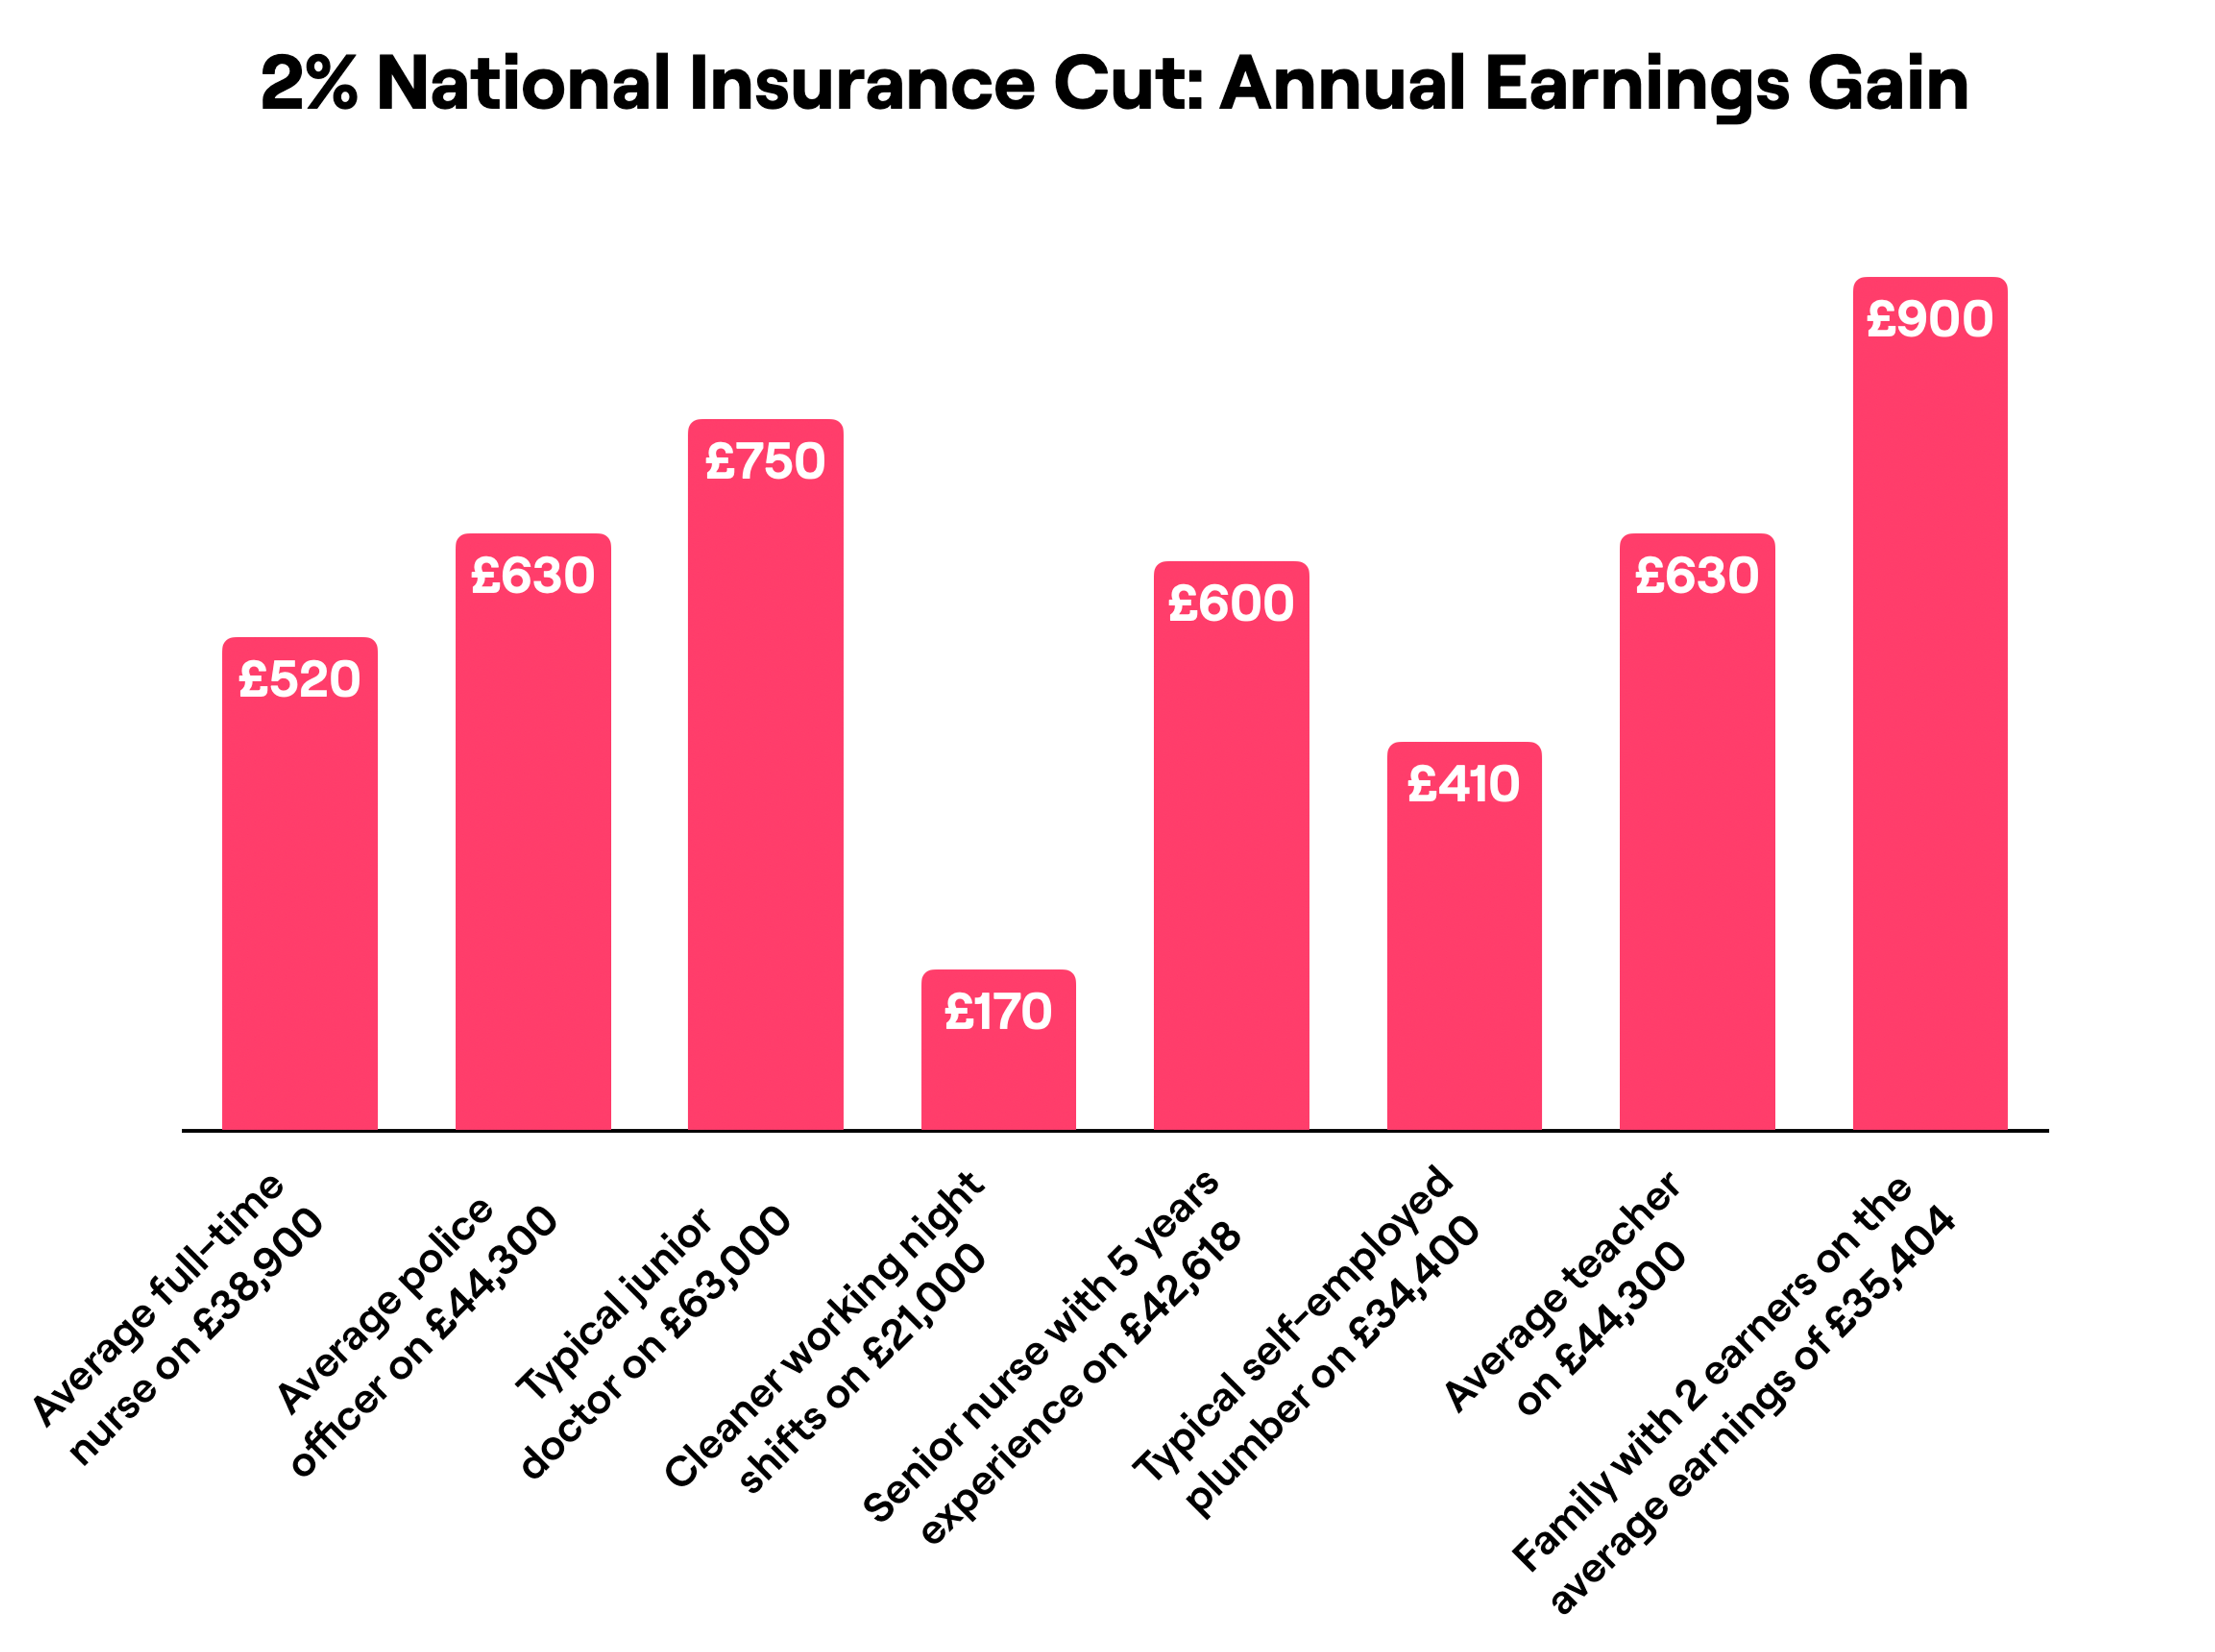 A bar chart titled "2% National Insurance Cut: Annual Earnings Gain," illustrating the financial benefit to various occupations. It shows the average full-time nurse gains £520, the average police officer £630, a typical junior doctor £750, a cleaner on night shifts £170, a senior nurse with 5 years of experience £600, a self-employed plumber £410, an average teacher on £34,400 £630, and a family with 2 earners on an average of £25,404 receives £900.